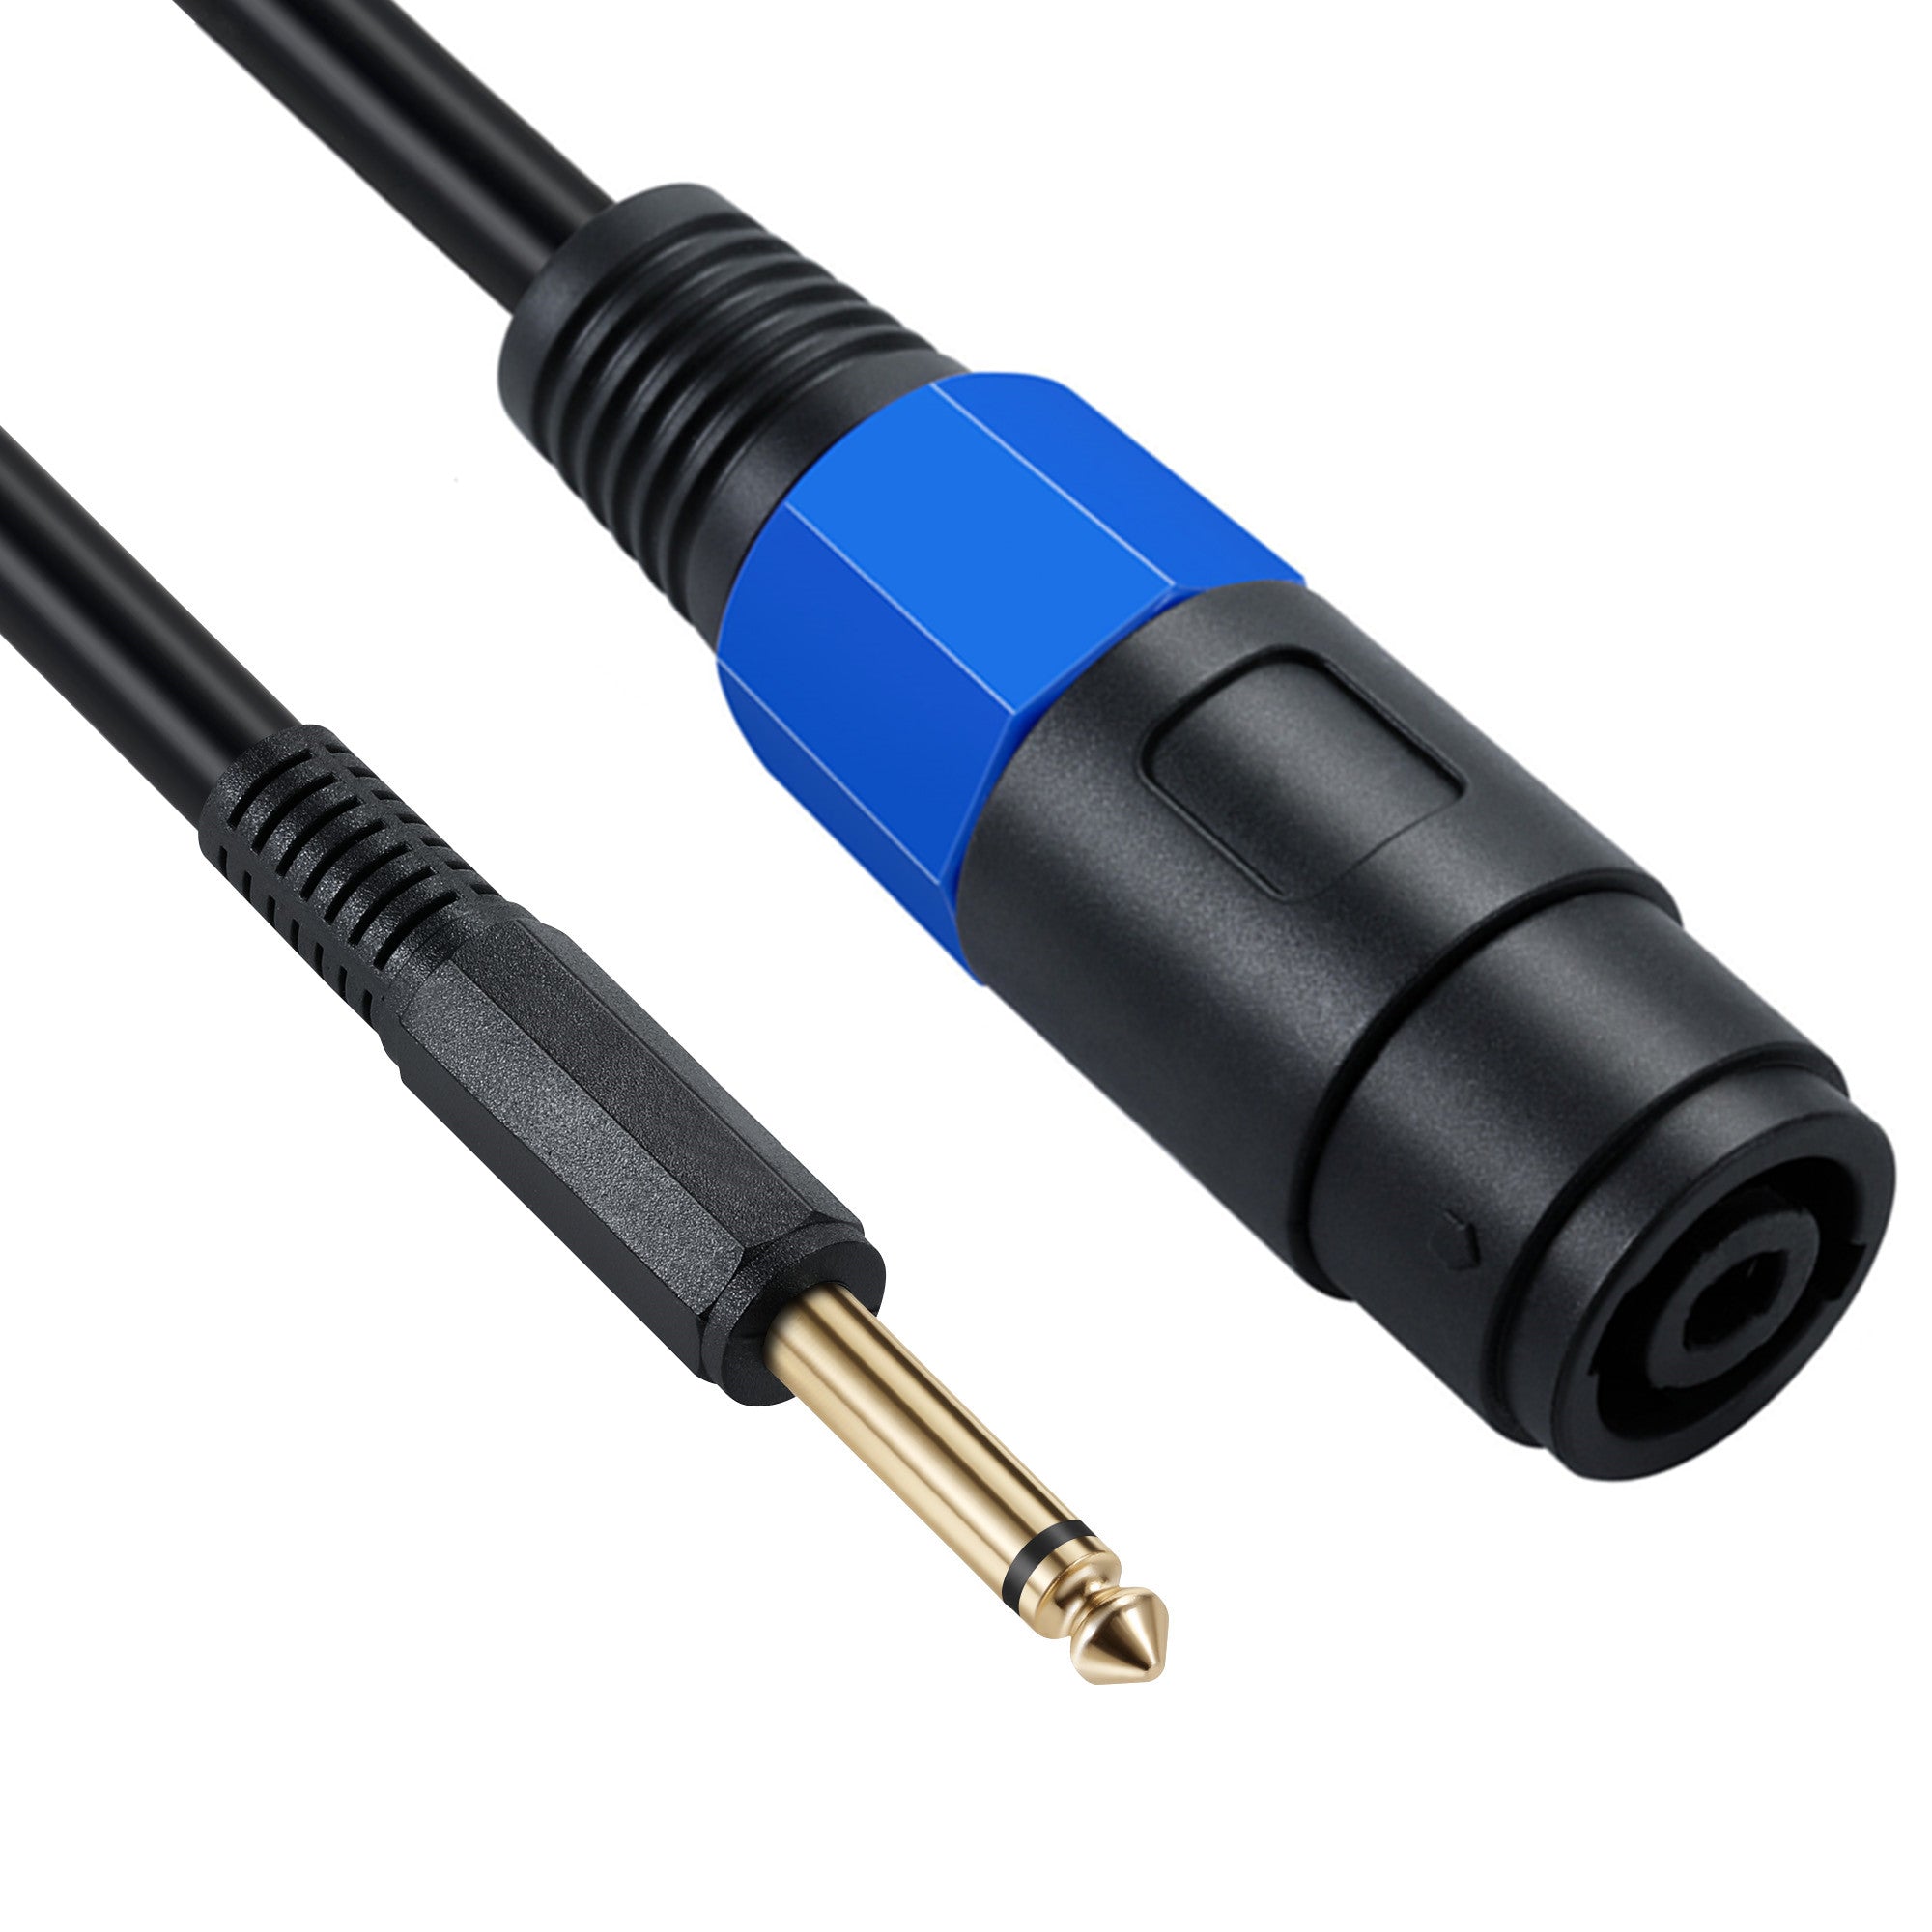 1/4" 6.35mm TS Male Speaker Cable with Twist Lock 0.5m